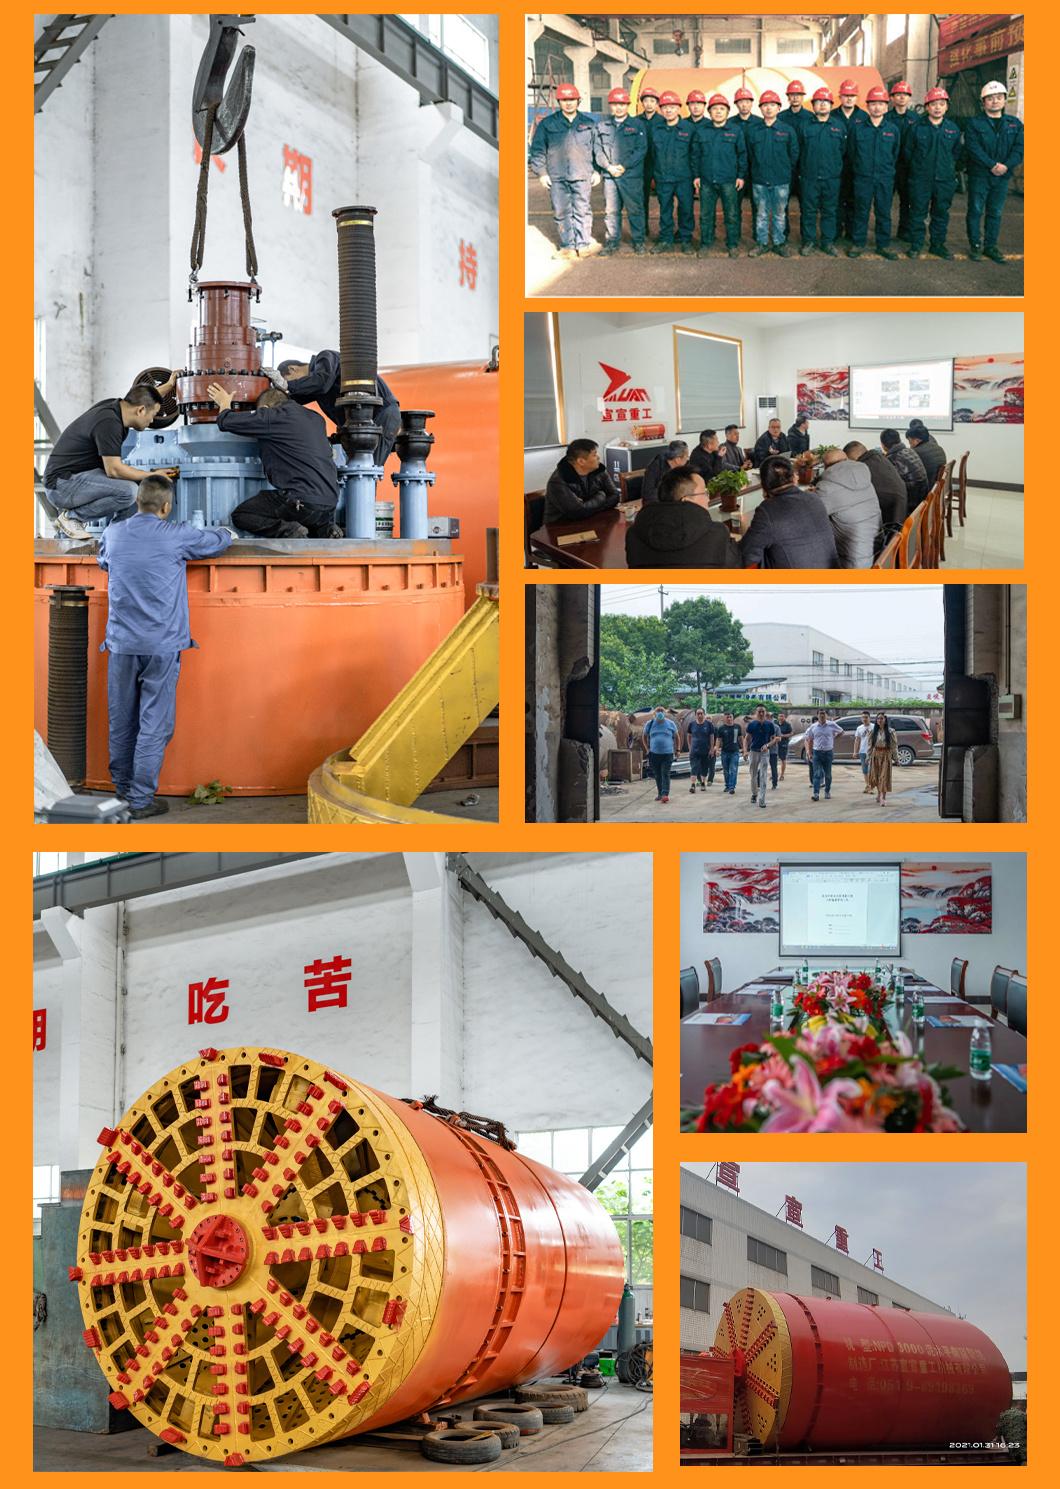 Ysd Series Trenchless Project Ysd3000 Rock Pipe Jacking Machine for Rcc